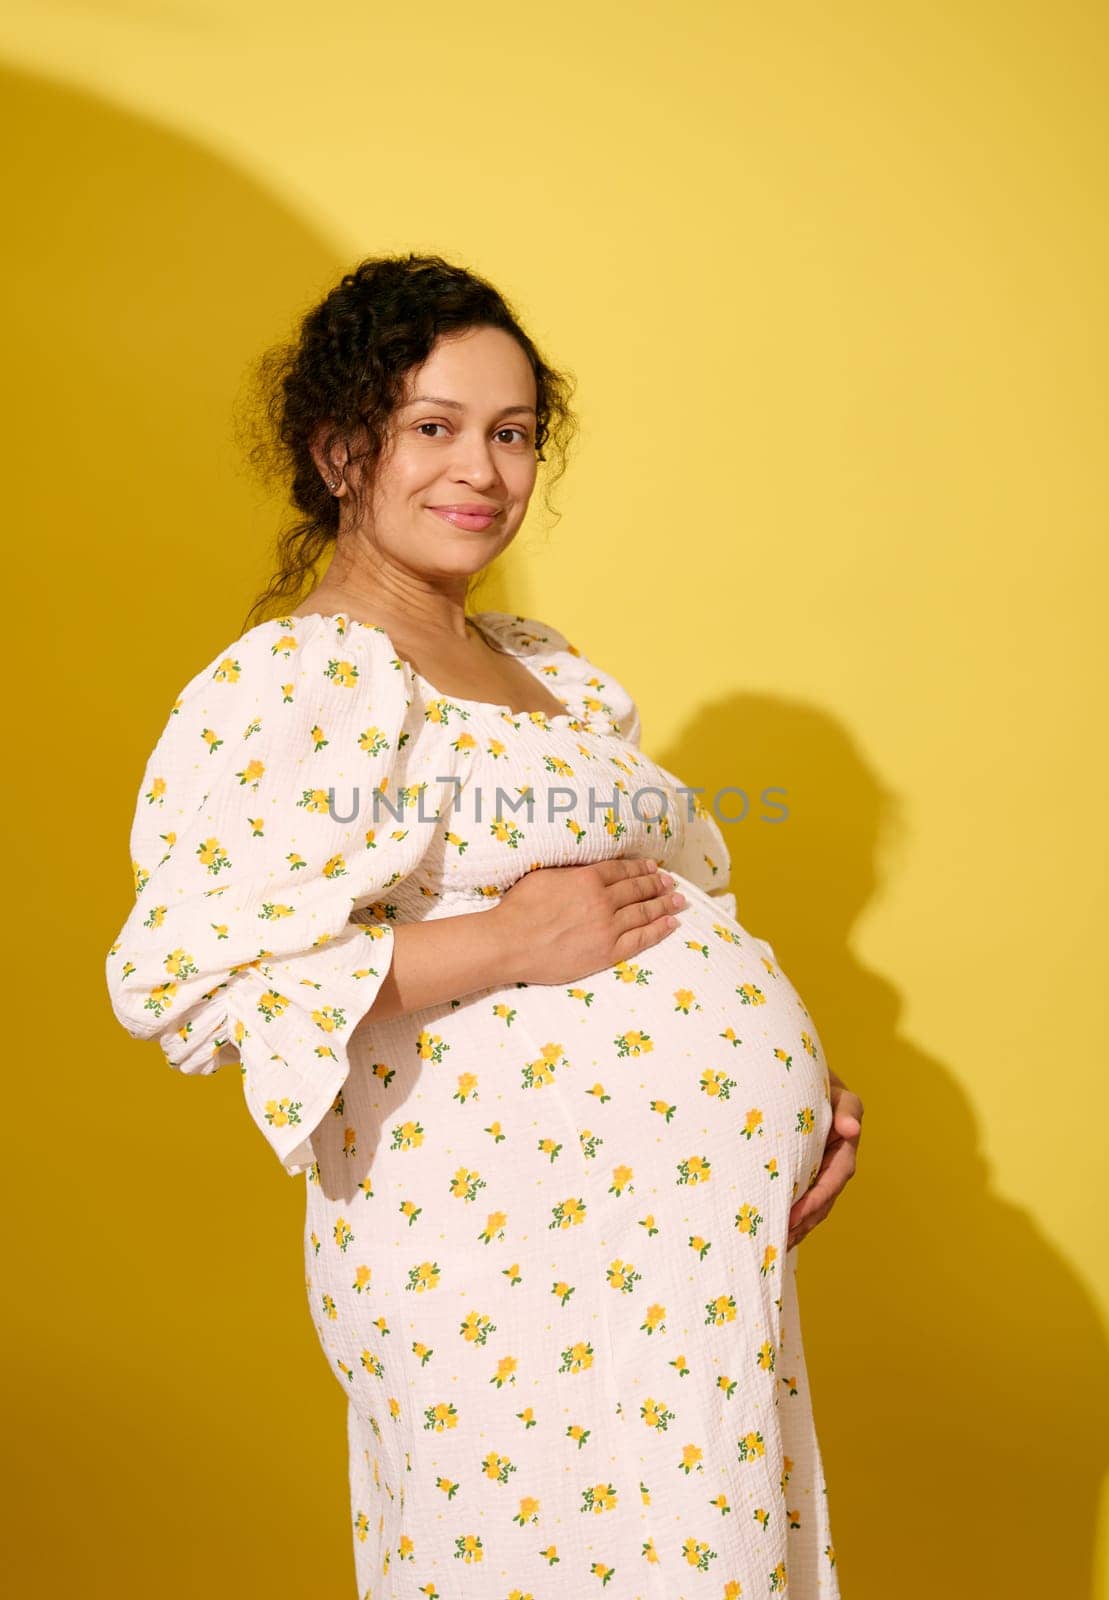 Studio portrait of a beautiful multi-ethnic pregnant curly haired woman, dressed in white summer dress, cutely smiling looking at camera, holding her belly, isolated over yellow studio background.